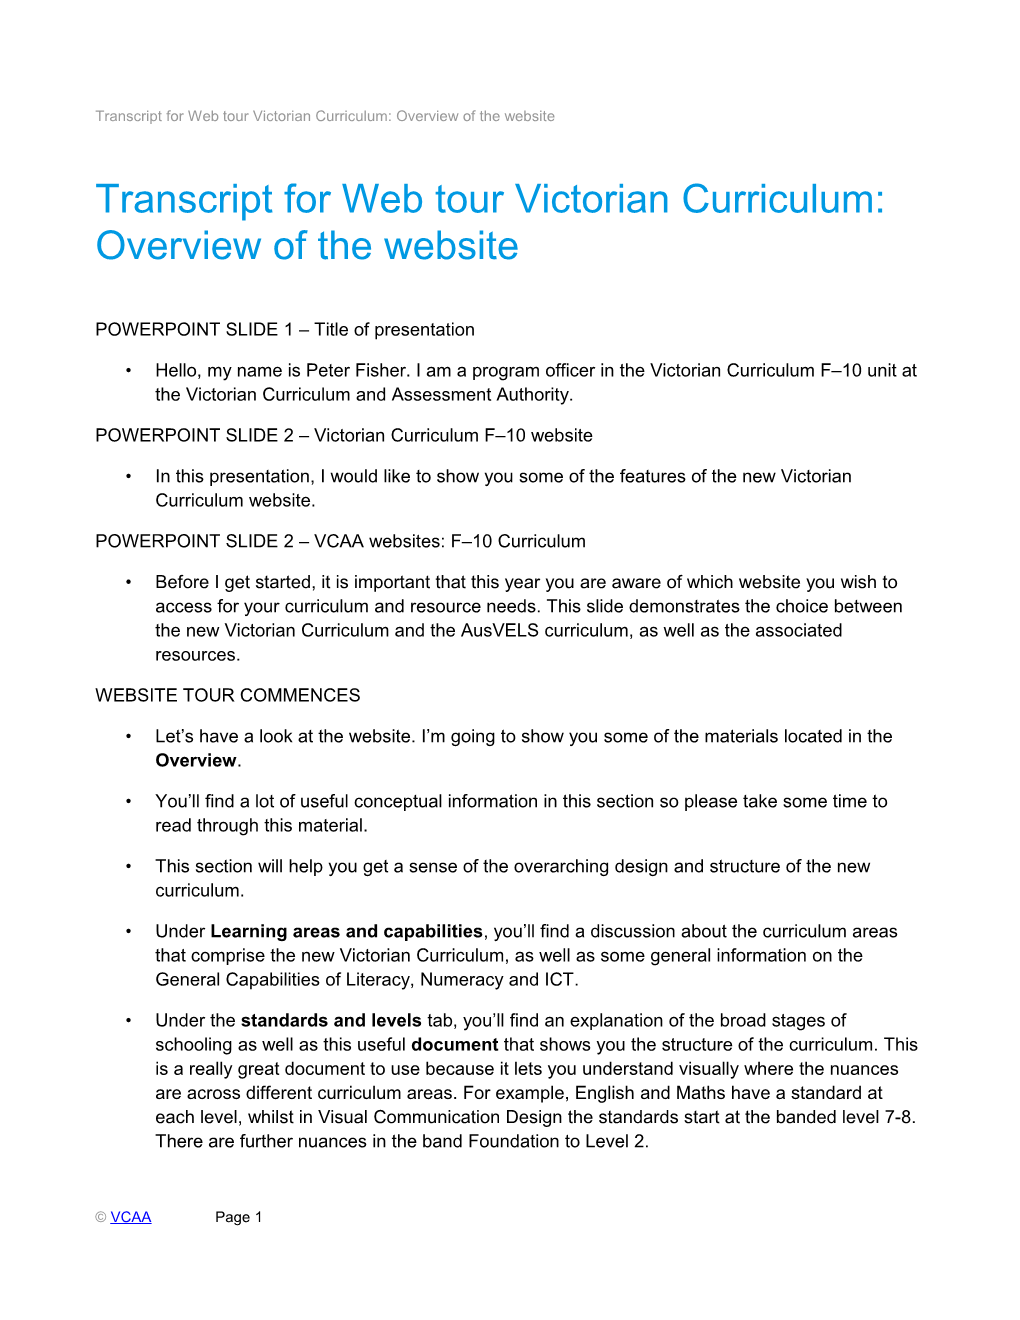 Transcript for Web Tour Victorian Curriculum: Overview of the Website